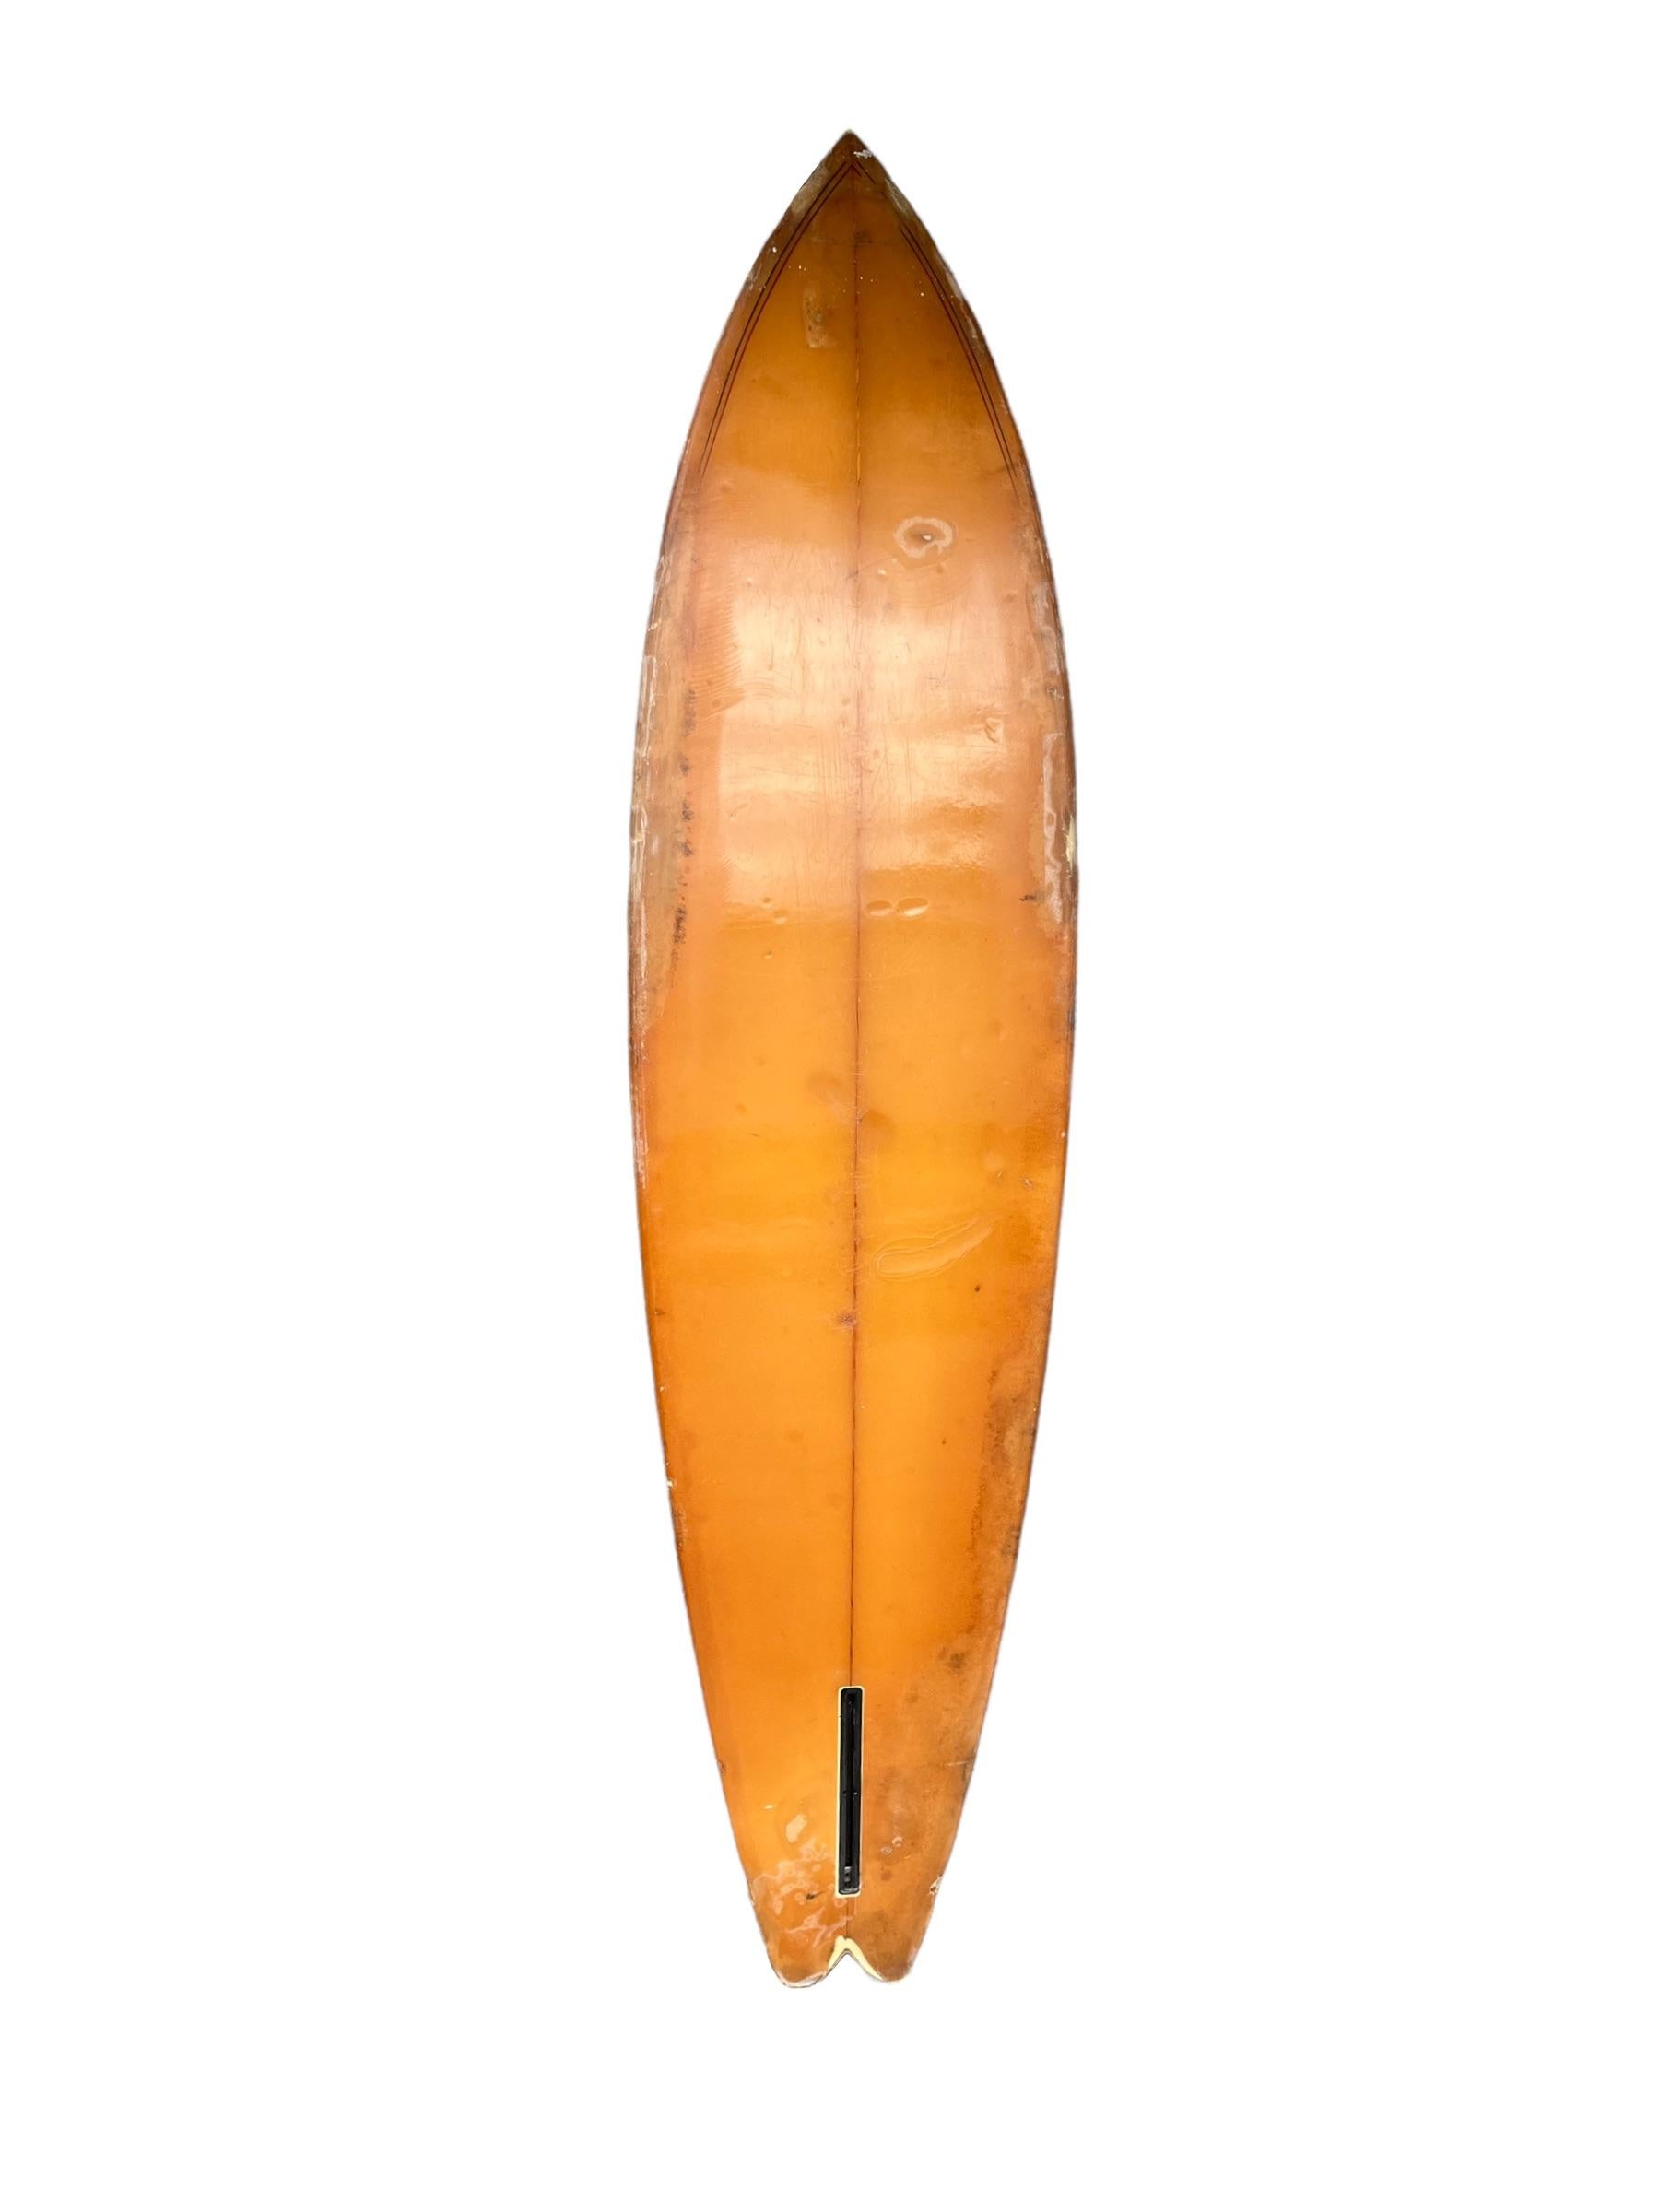 Mid-late 1970s Dick Brewer Surfboards single fin shaped for Burton “Buzzy” Kerbox by Joe Blair. Features a unique arrowhead resin pattern with swallowtail shape and double pinstriped border lines. Burton “Buzzy” Kerbox was a renowned surfer in